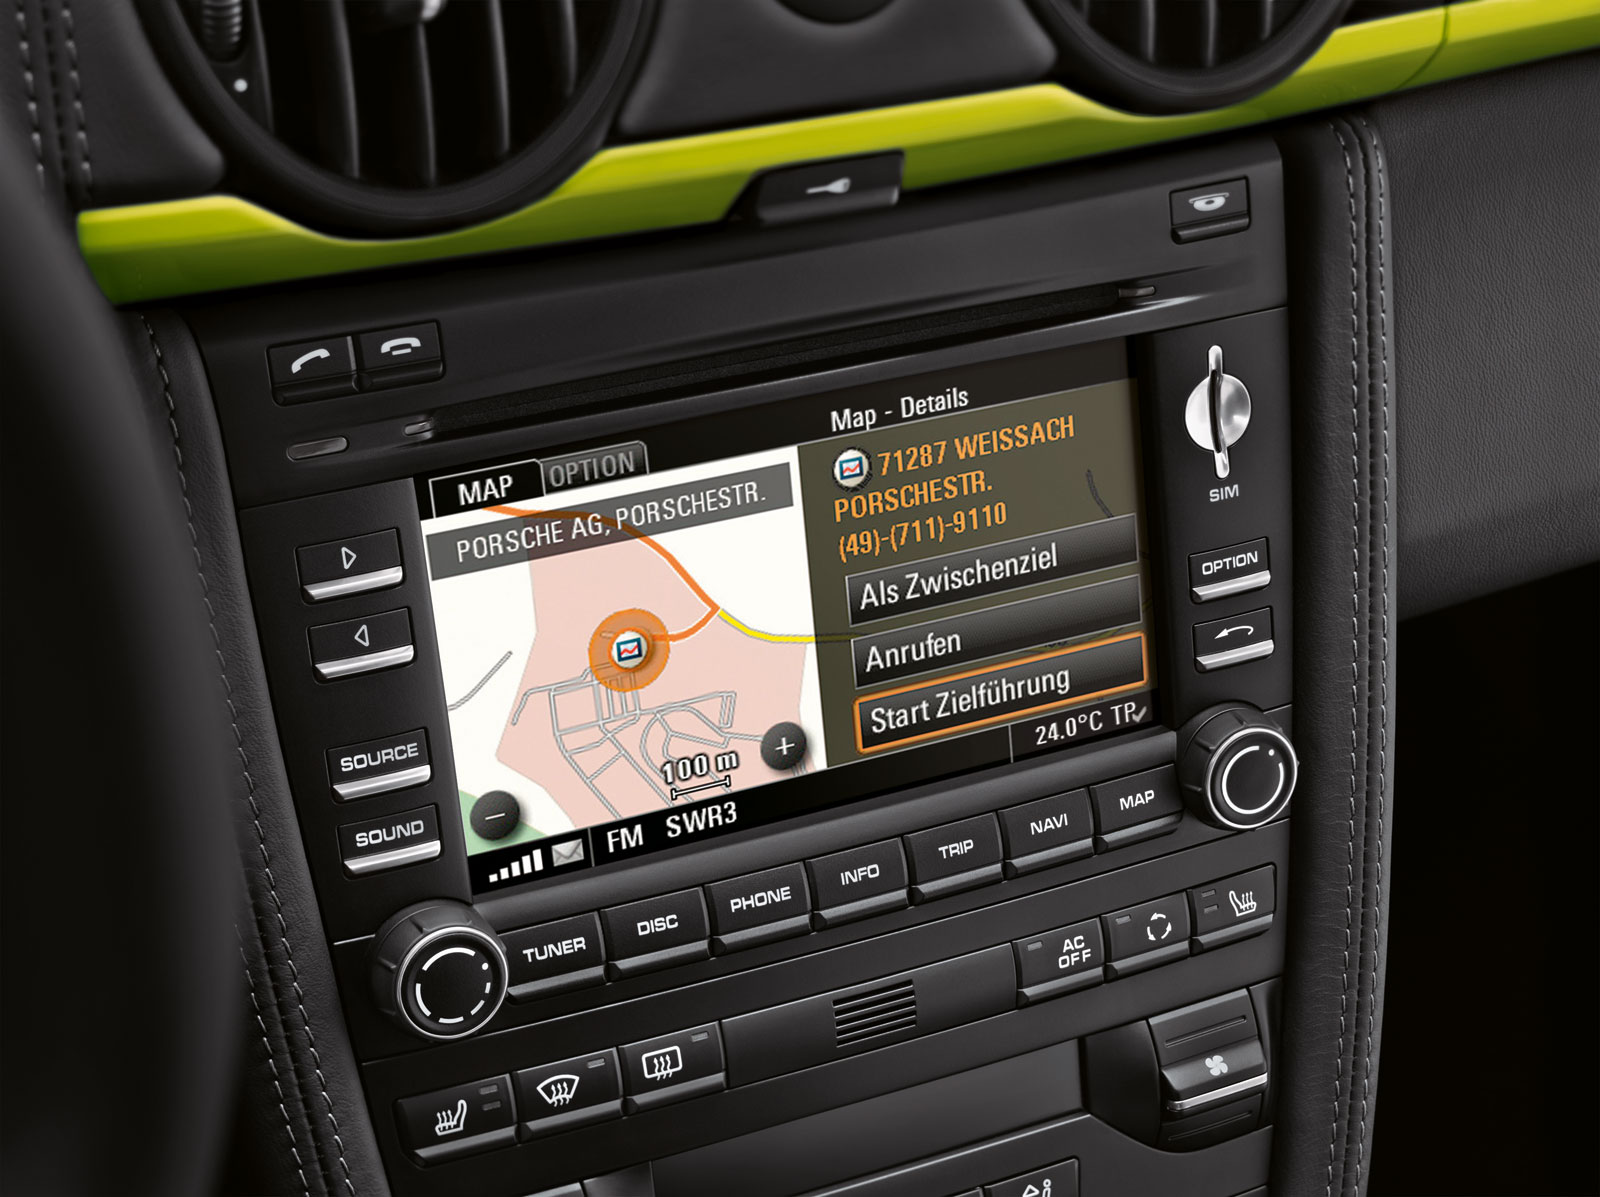 Broaden your view on navigation systems